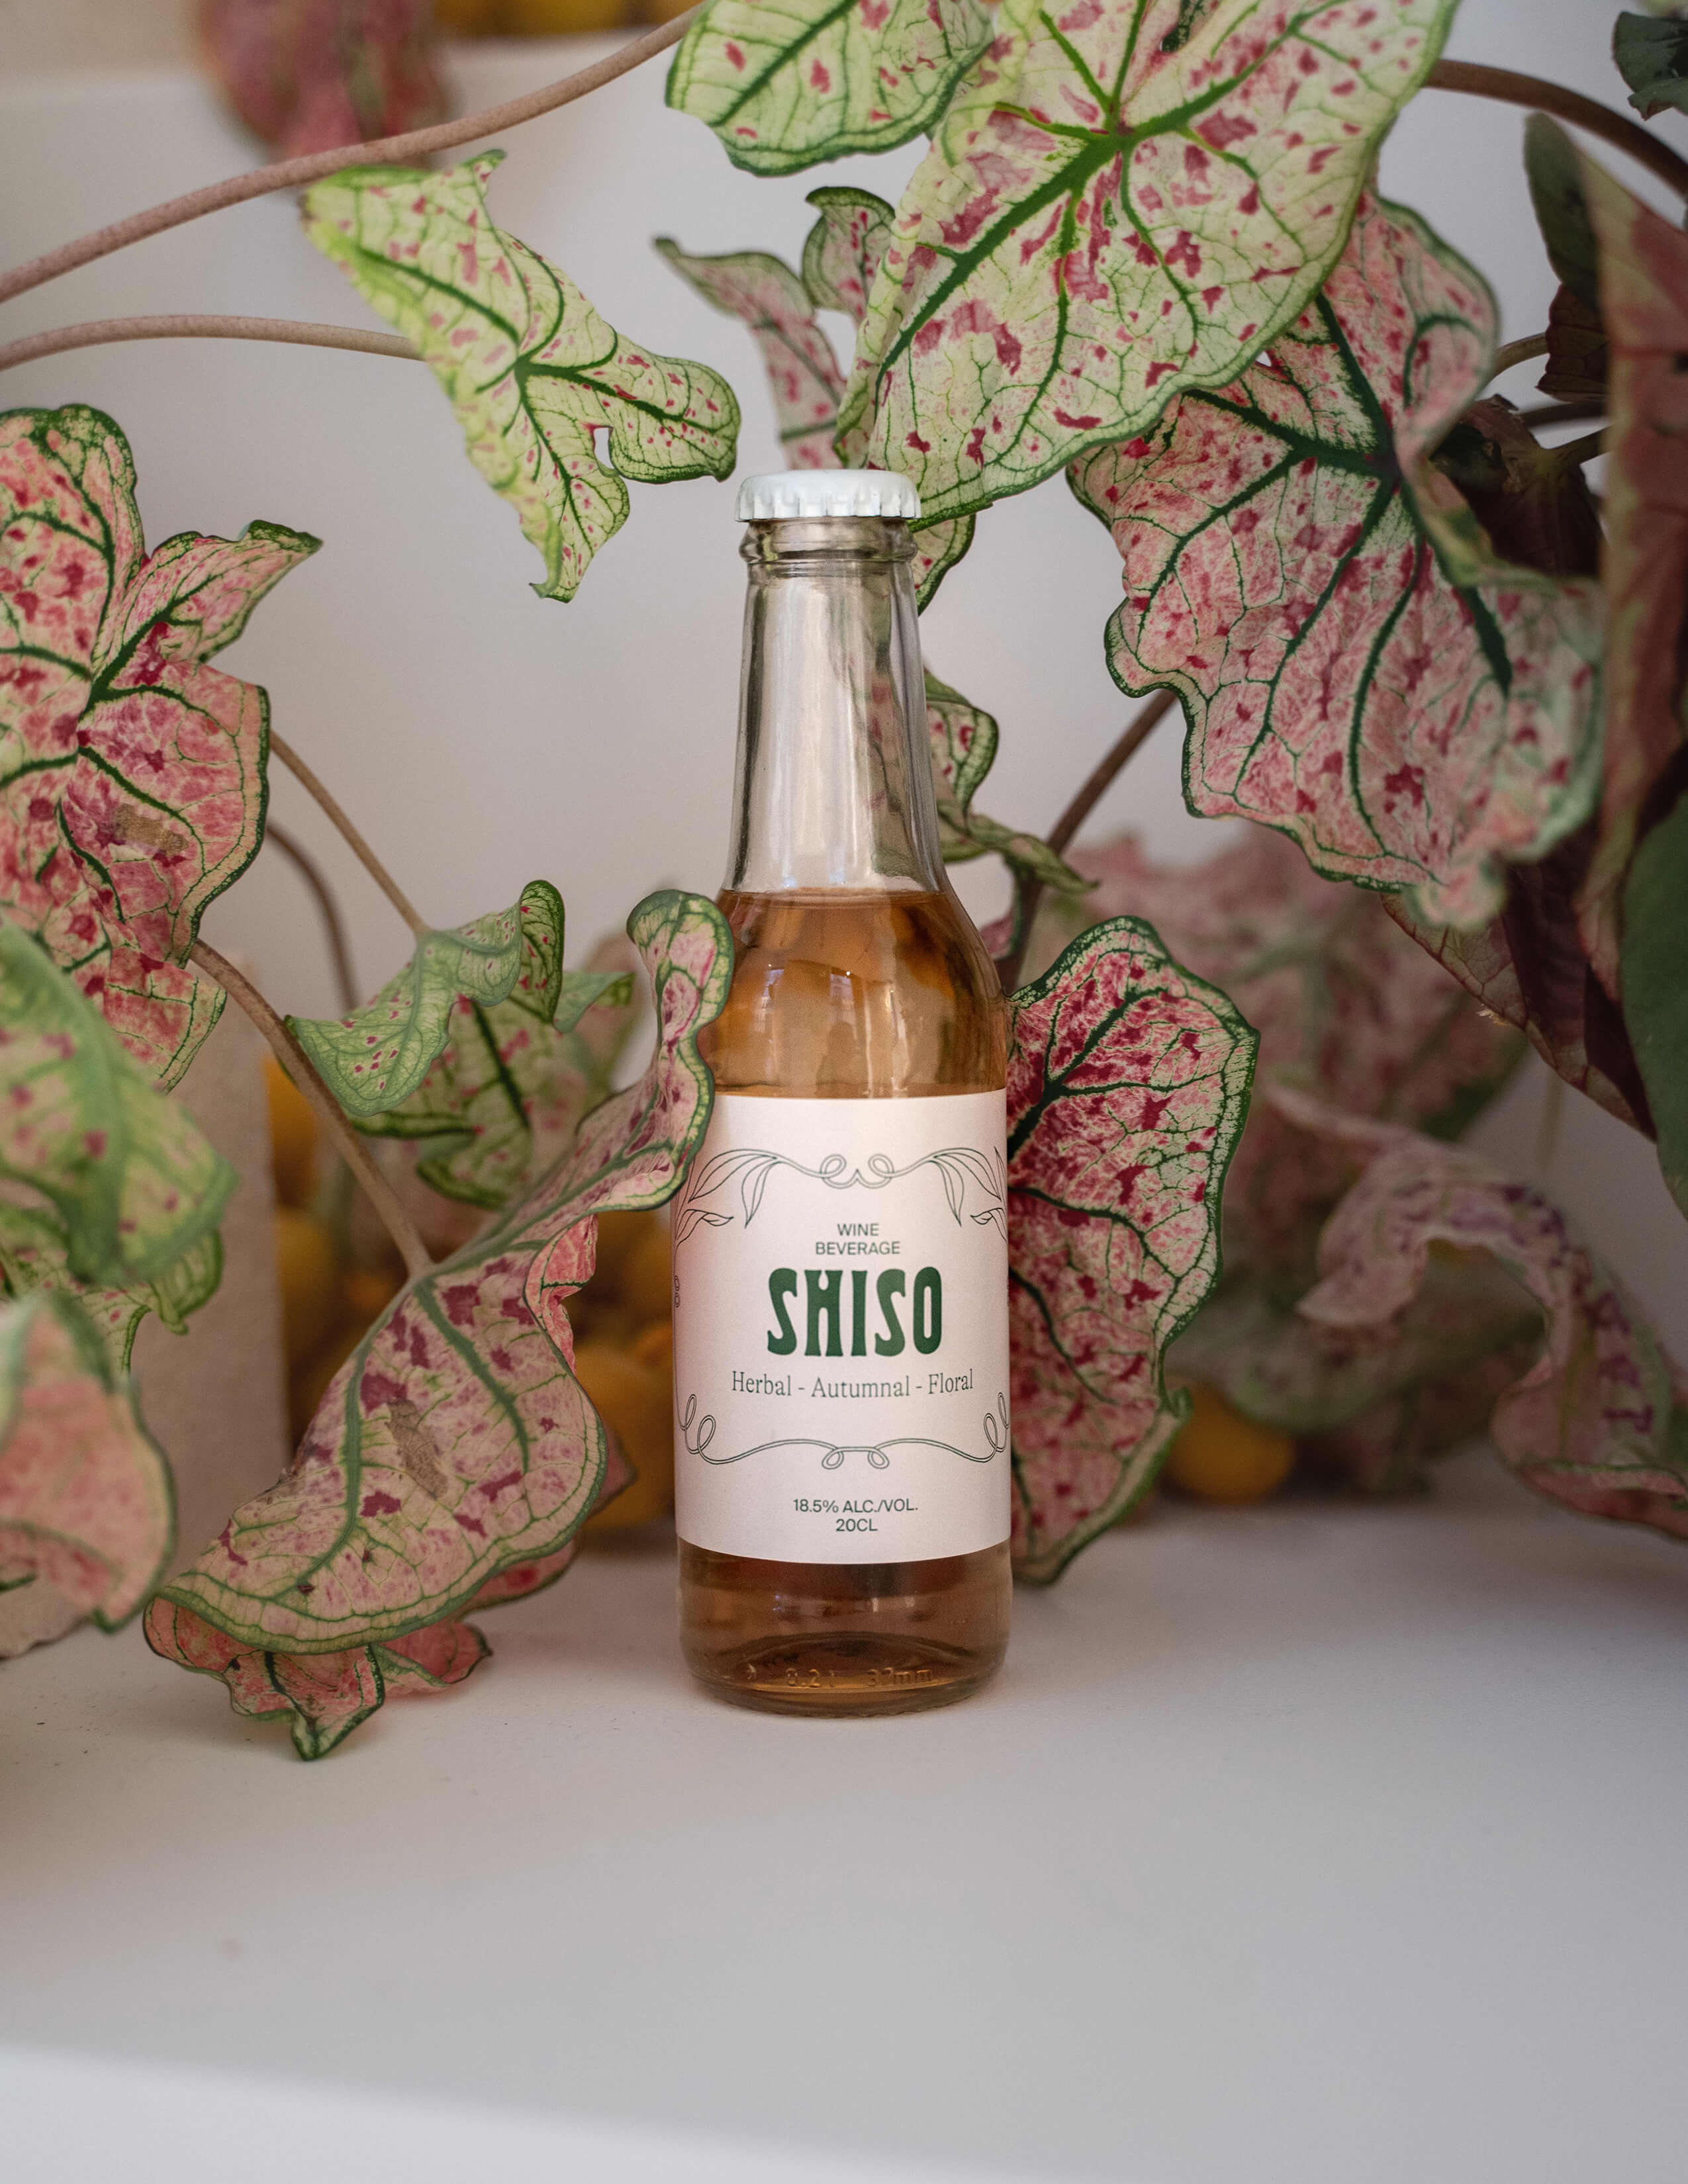 A bottle of alcoholic drink with a Shiso label surrounded by Elephant ears plants.